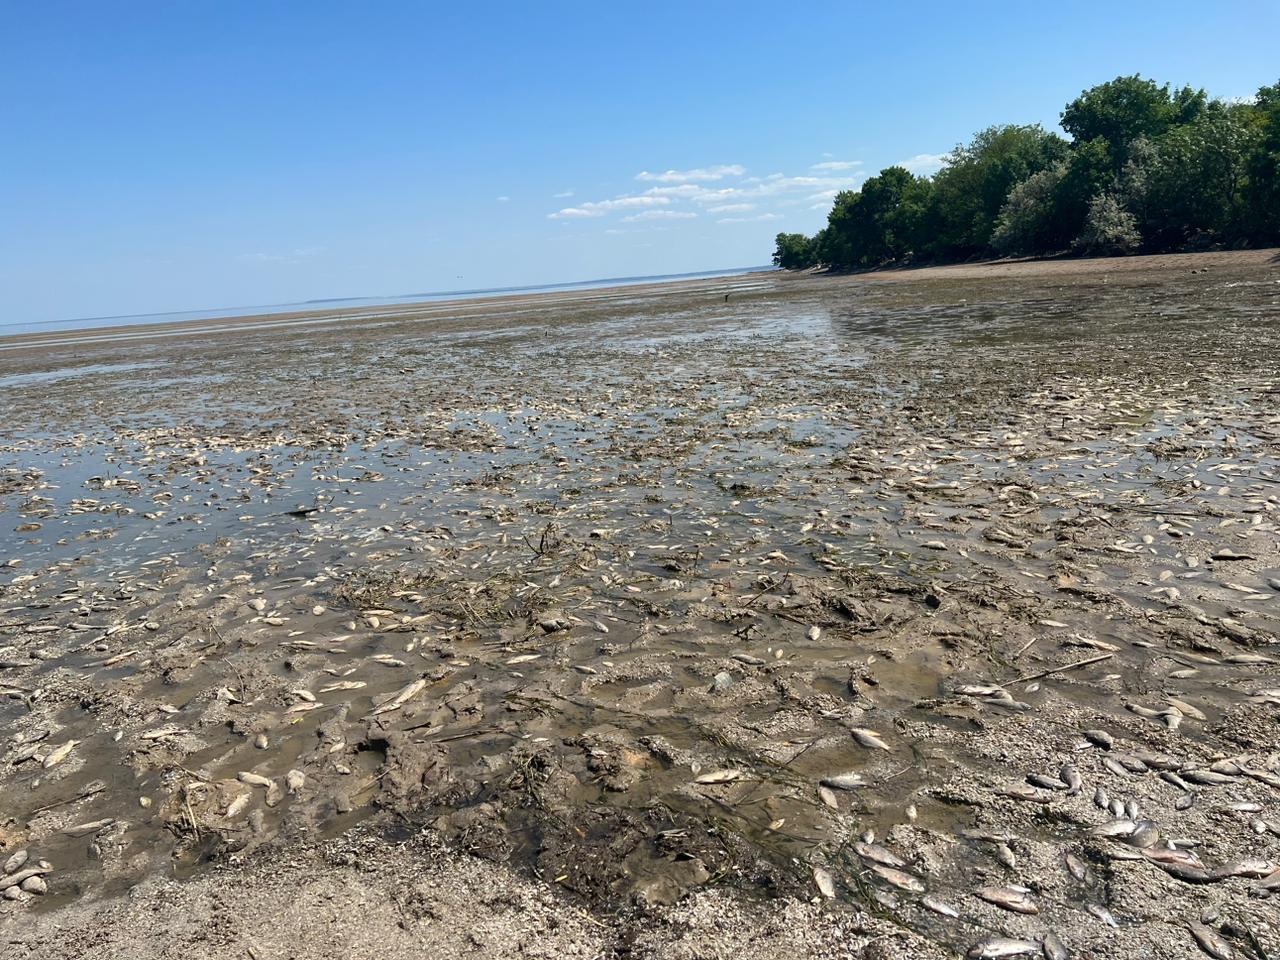 Law enforcement officials record the consequences of ecocide in the Dnipropetrovsk region: hundreds of thousands of fish died